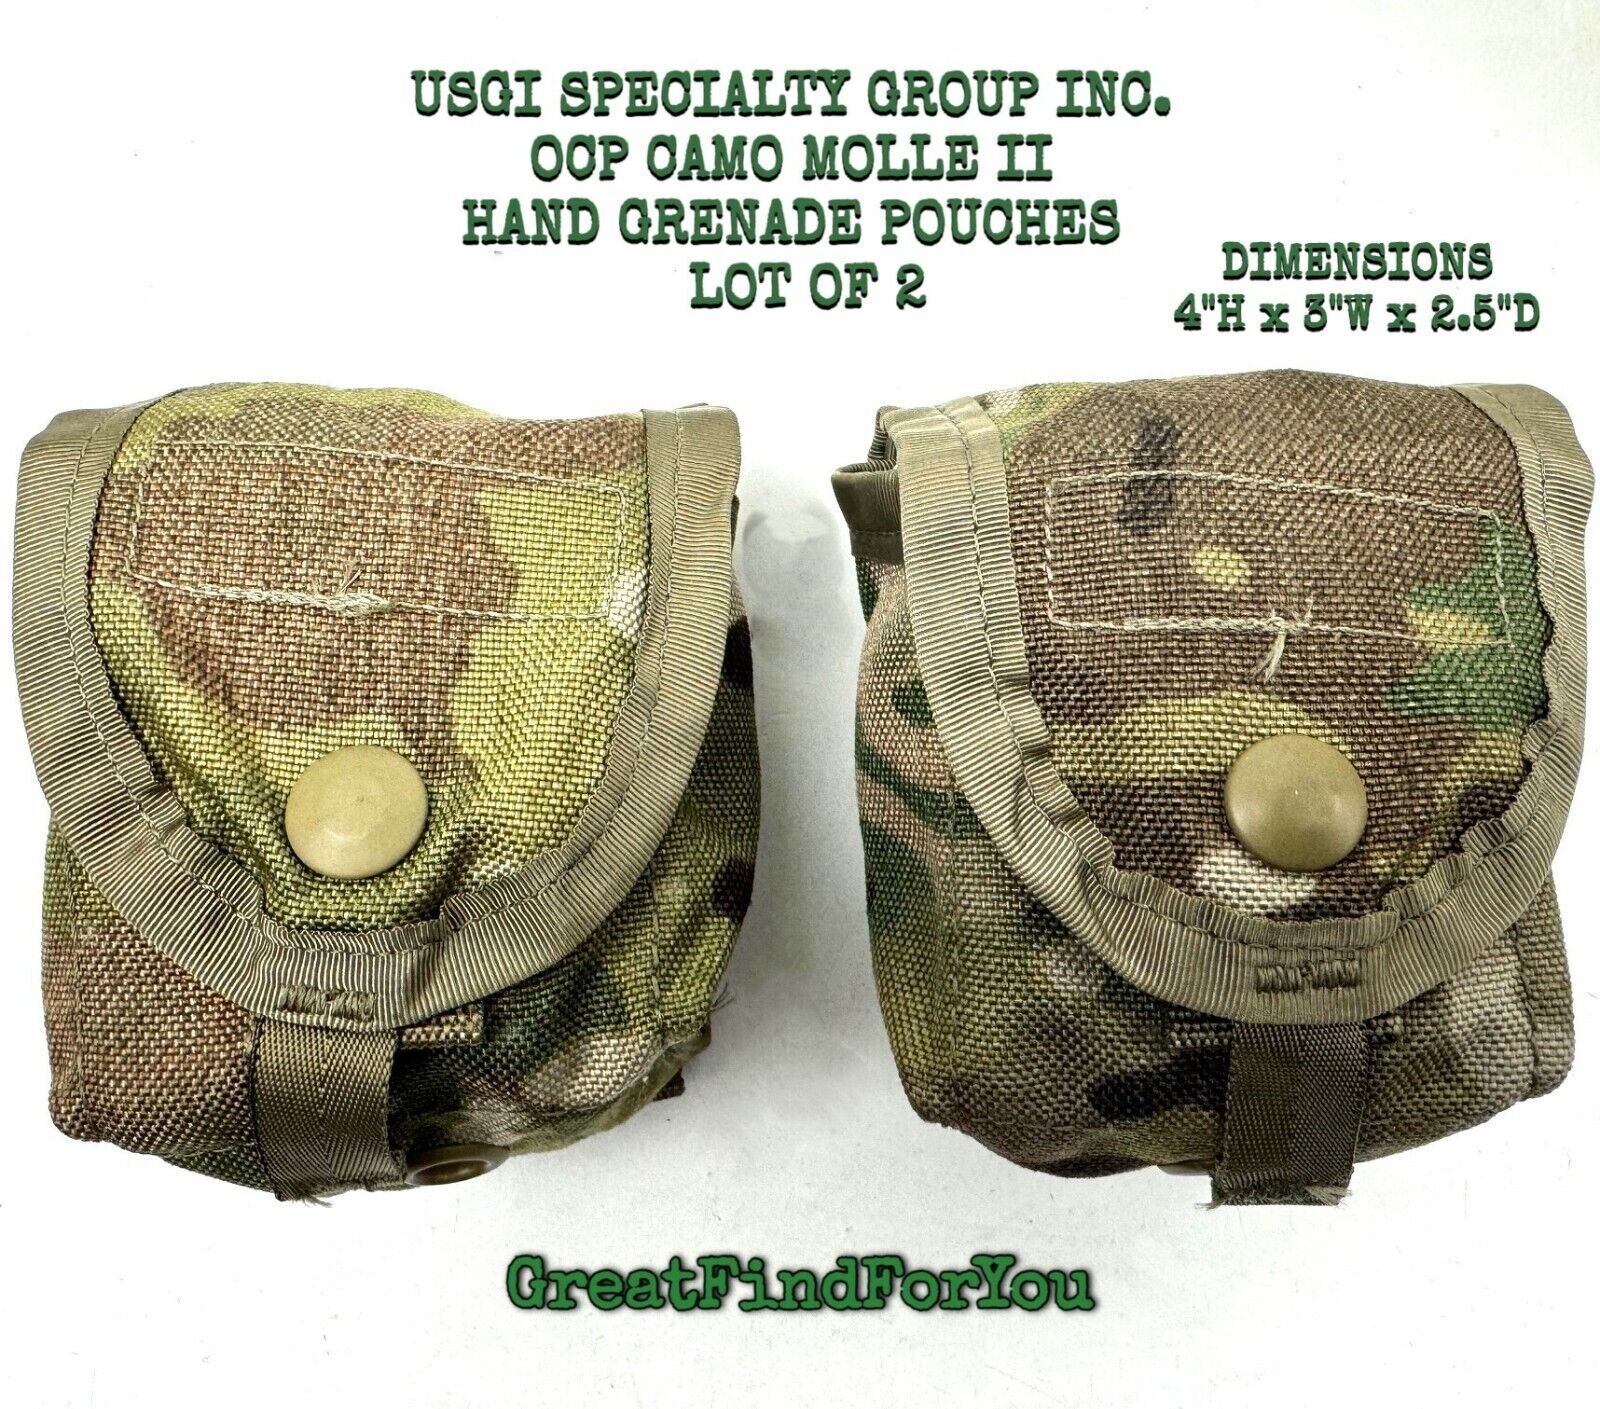 USGI SPECIALTY GROUP INC. OCP CAMO MOLLE II HAND GRENADE POUCHES - LOT OF 2